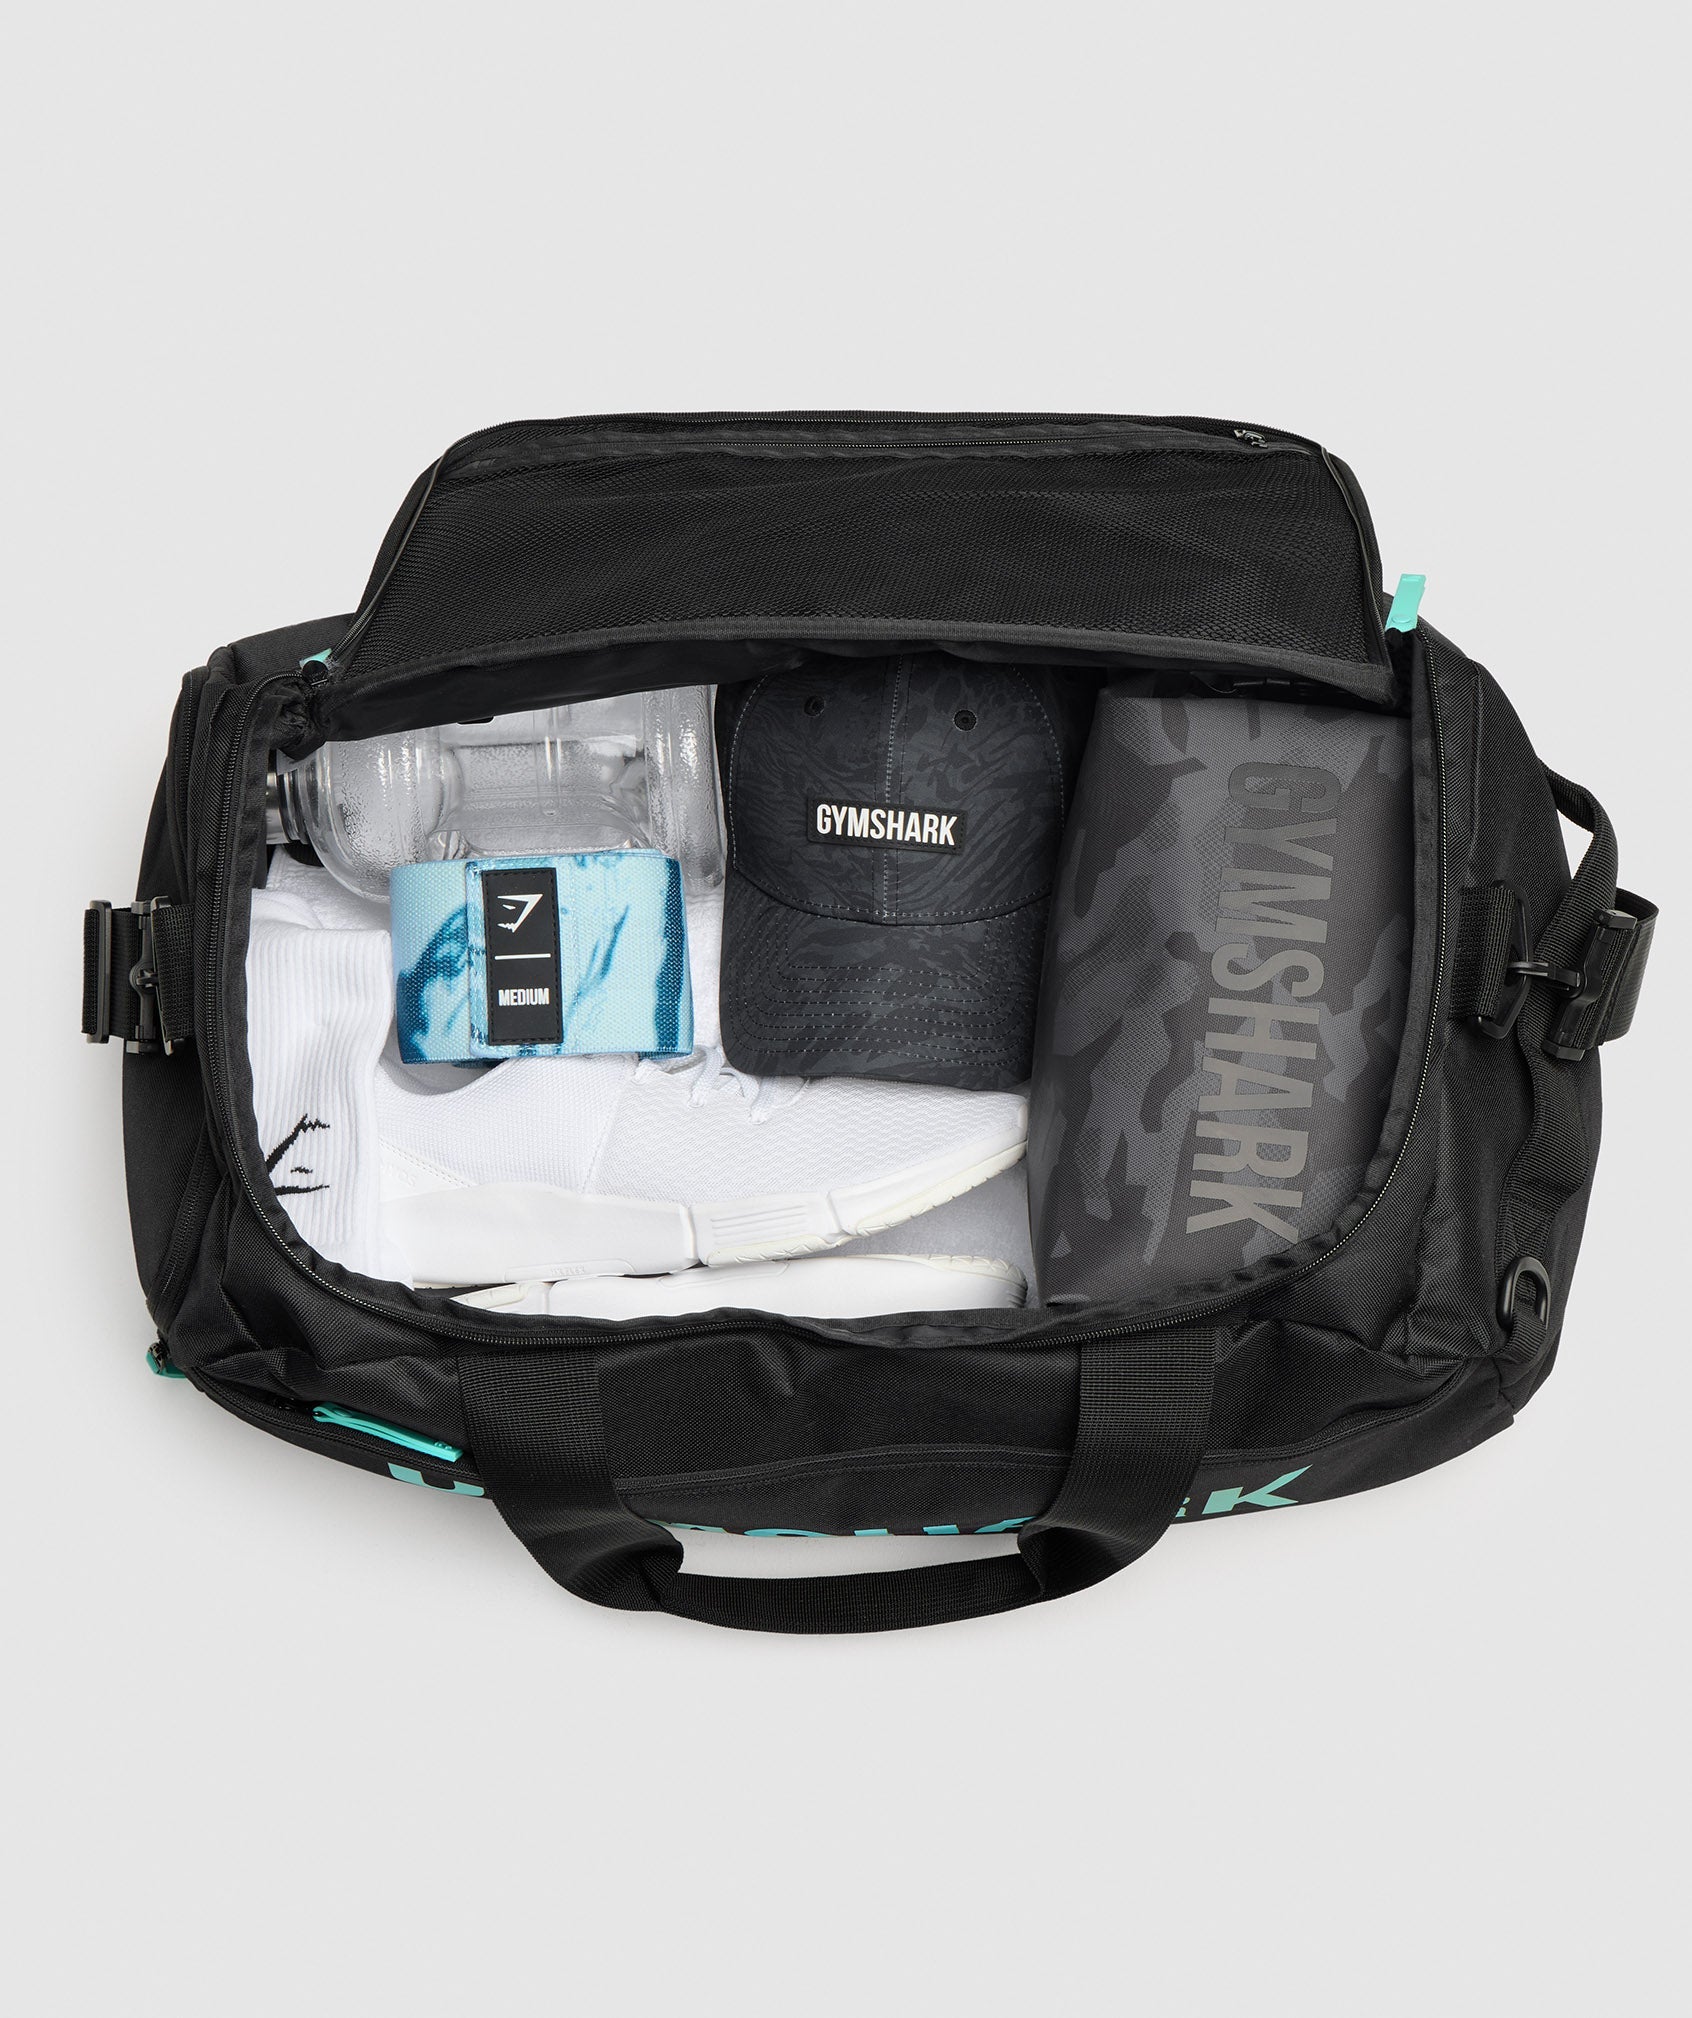 LC Holdall in Black/Turquoise - view 5